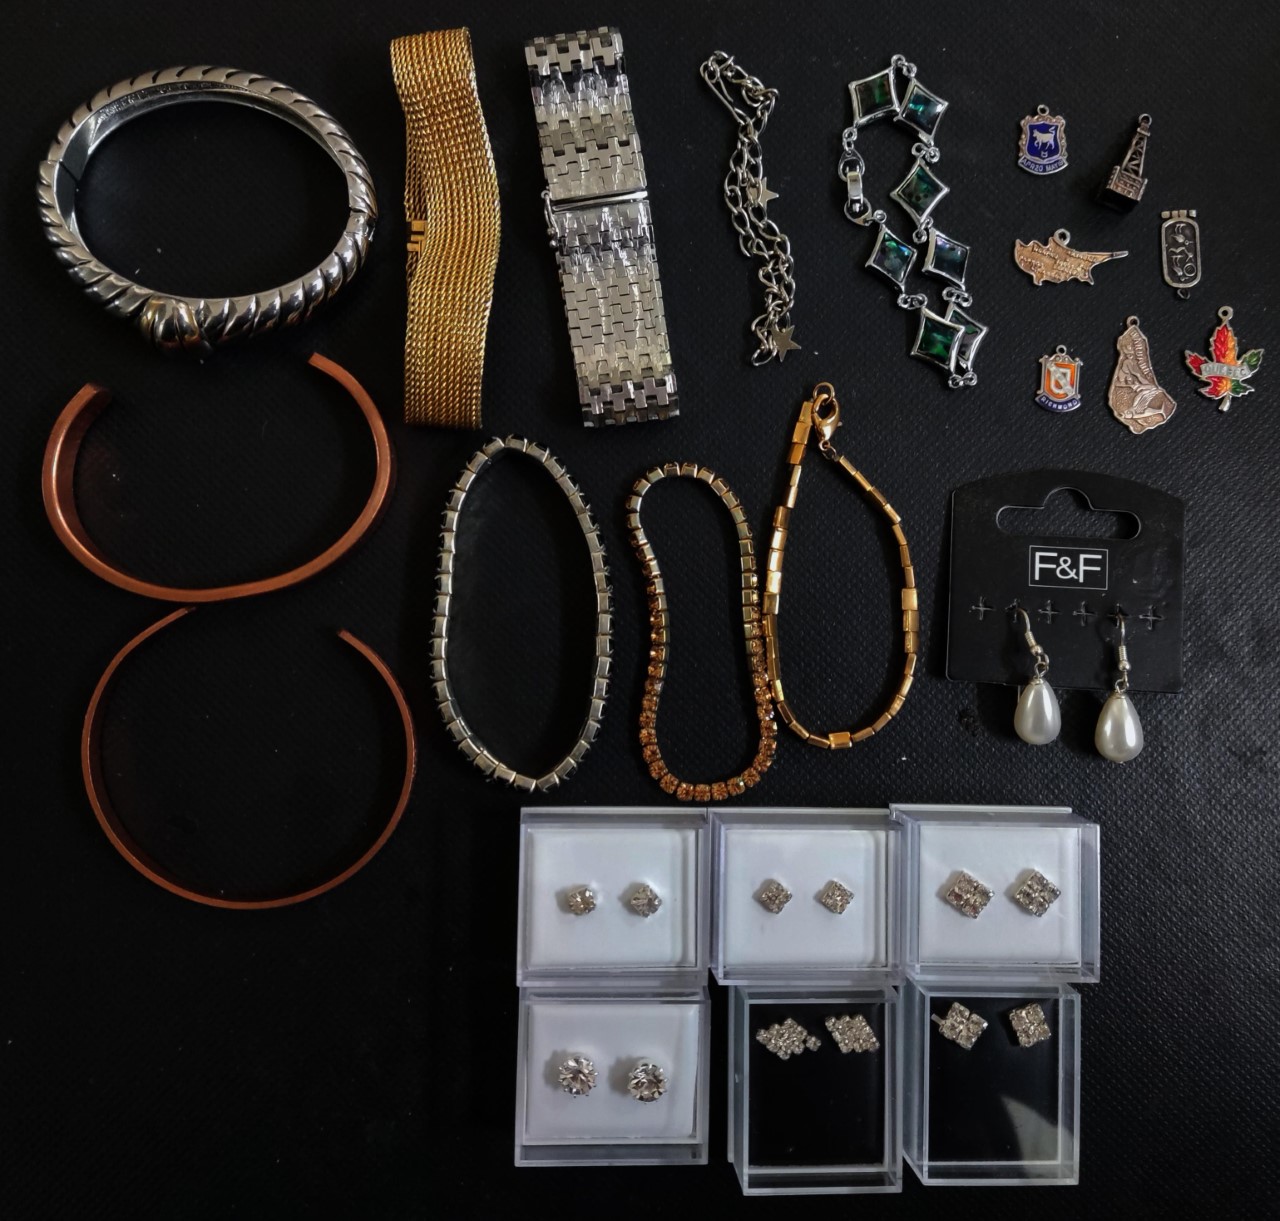 6 pairs of boxed Diamante earrings, copper bangles and other costume jewellery.